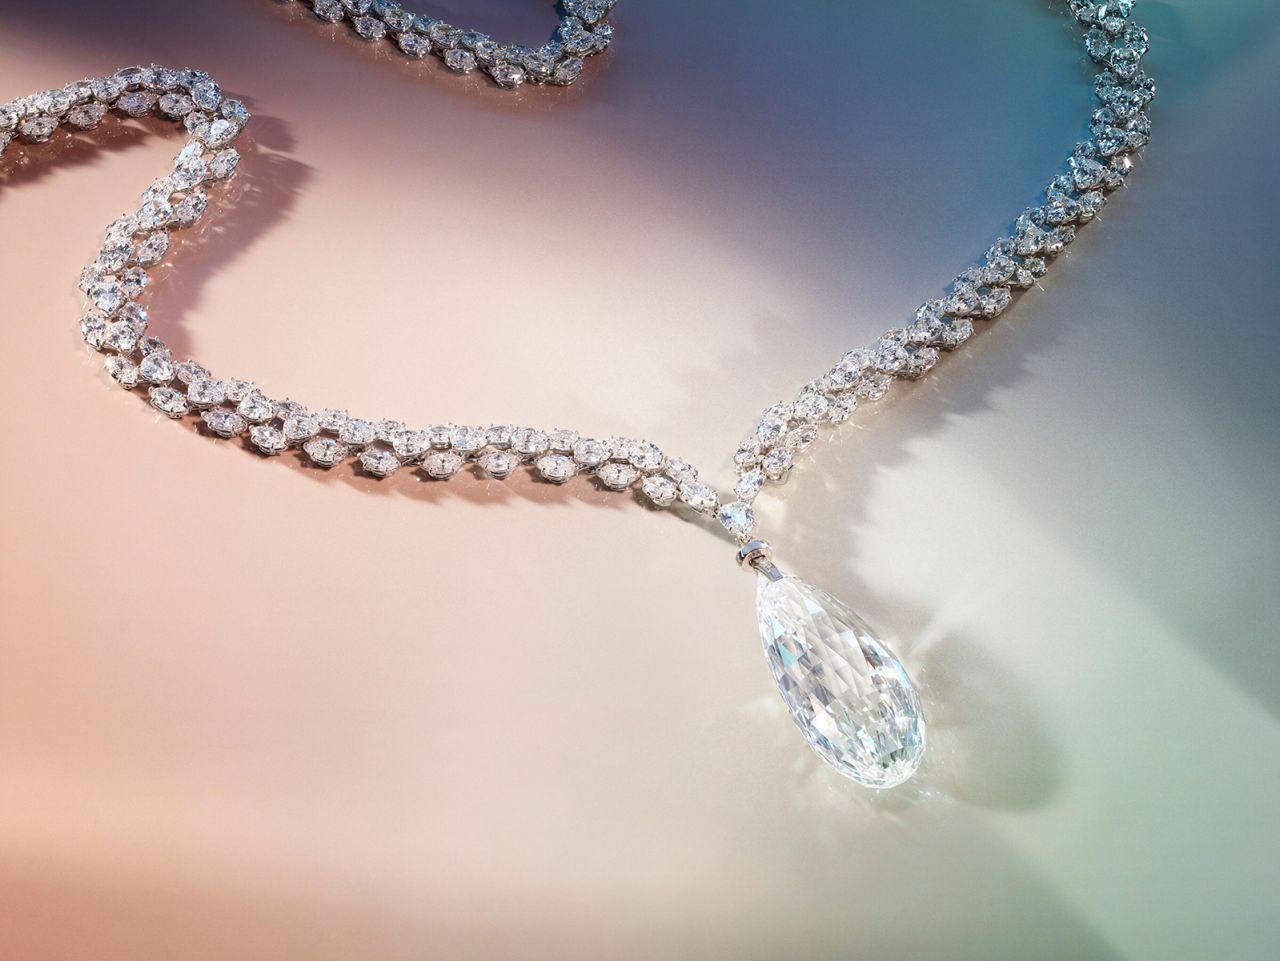 The Harry Winston necklace features a 90.38-carat briolette-cut diamond, alongside smaller marquise and pear-shaped diamonds.